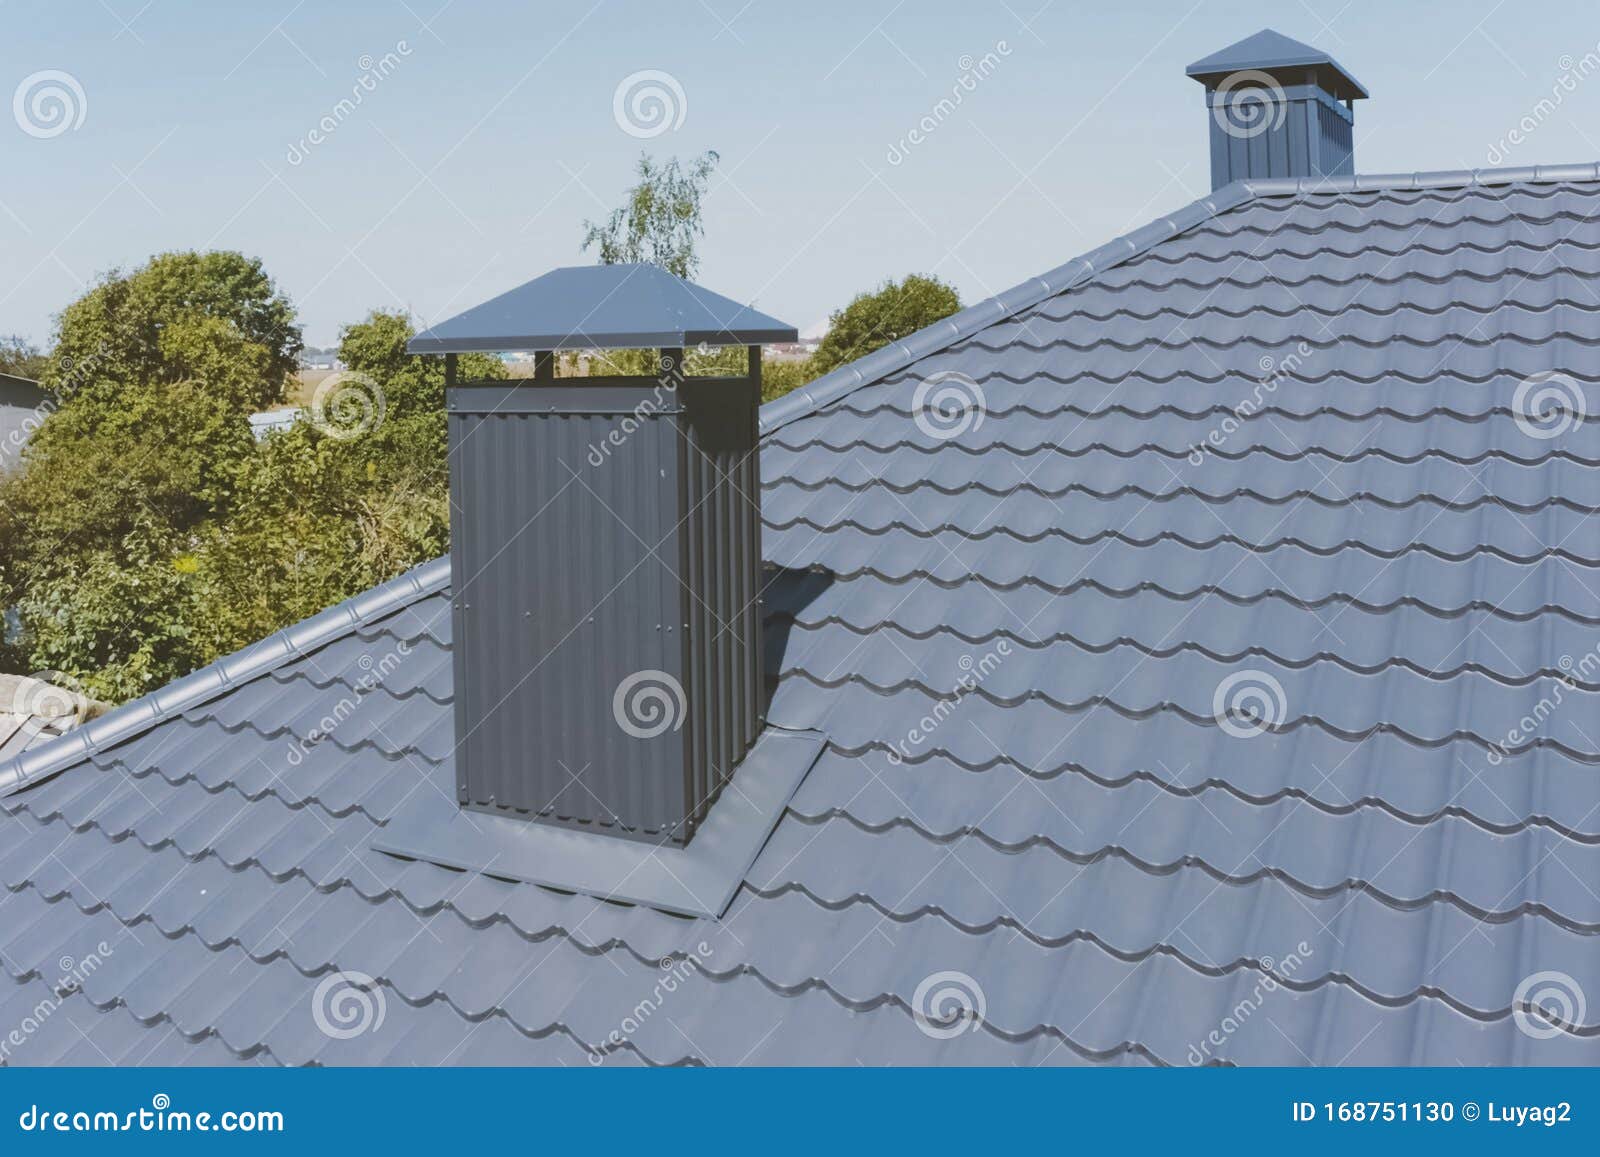 Grayblue Metal Roof Tiles On The Roof Of The House 